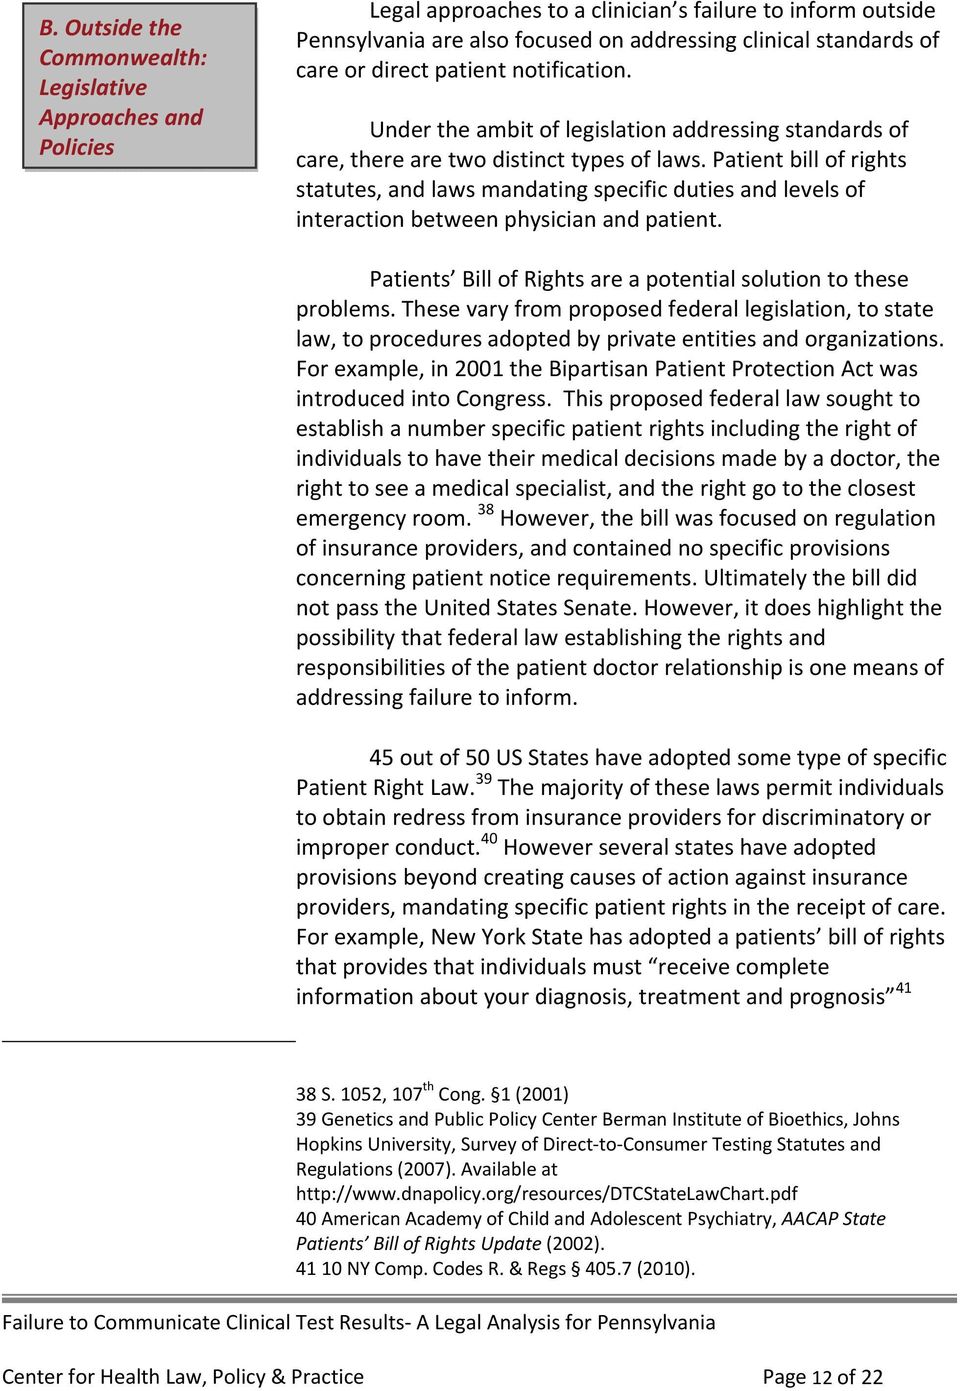 Patient bill of rights statutes, and laws mandating specific duties and levels of interaction between physician and patient. Patients Bill of Rights are a potential solution to these problems.